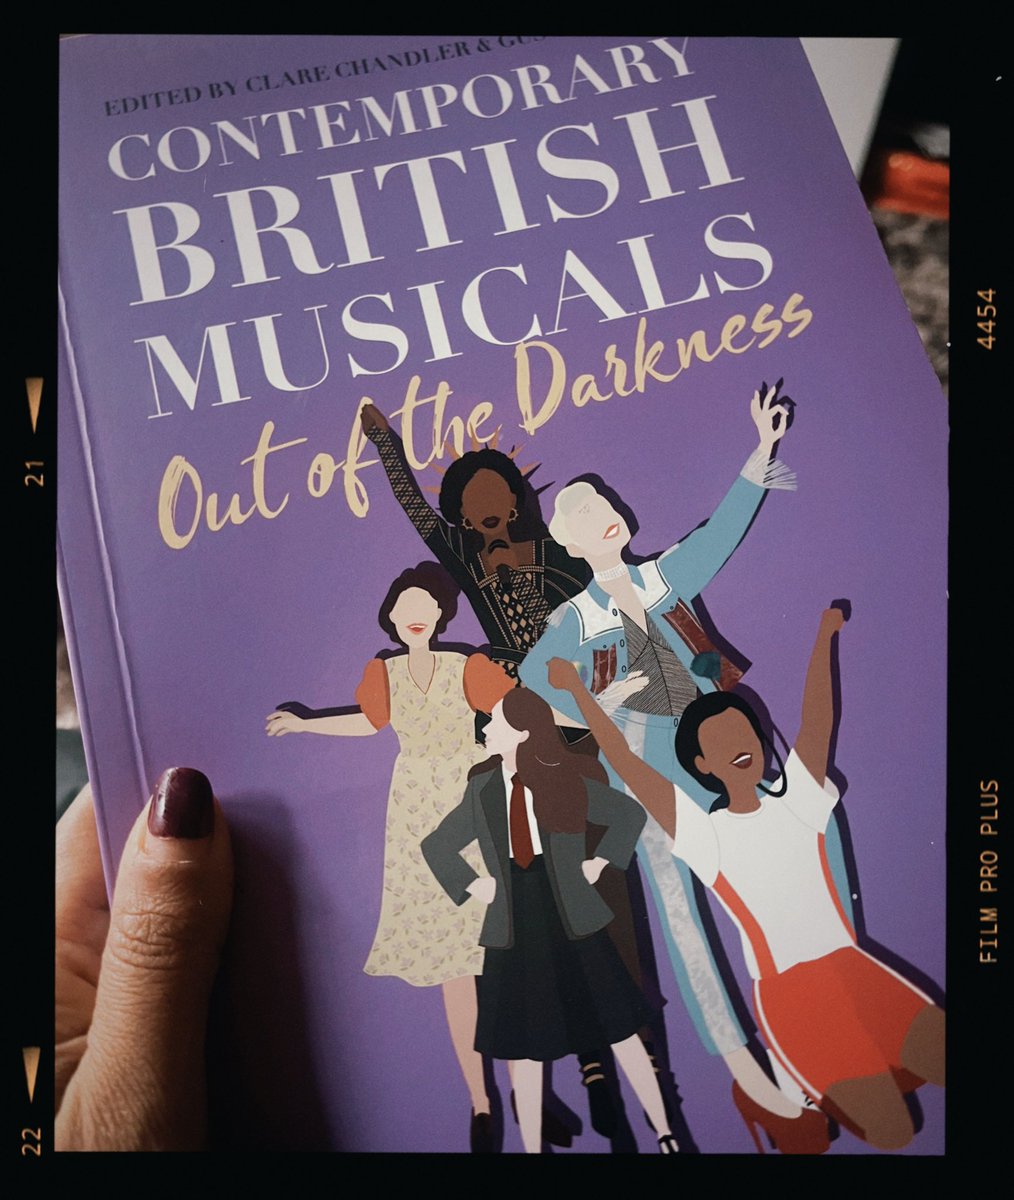 Thankyou @GusGowland for asking me to be interviewed for this important book that represents contemporary musicals an important read for the next generation of aspiring performers ♥️ @MethuenDrama edited by Clare Chandler & Gus Gowland